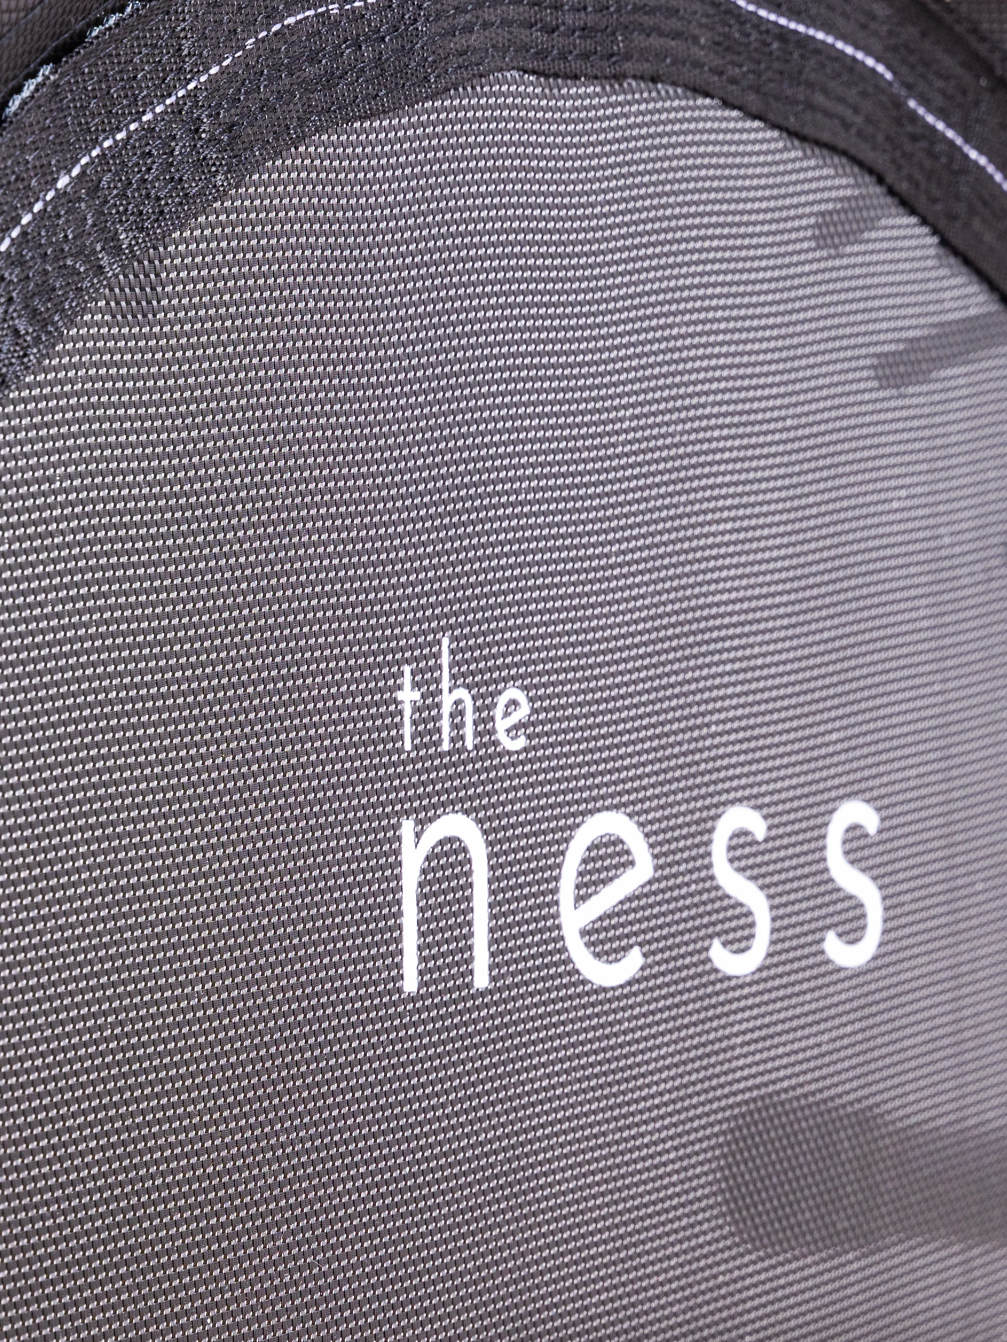 A closeup of a rebounder trampoline from the Ness